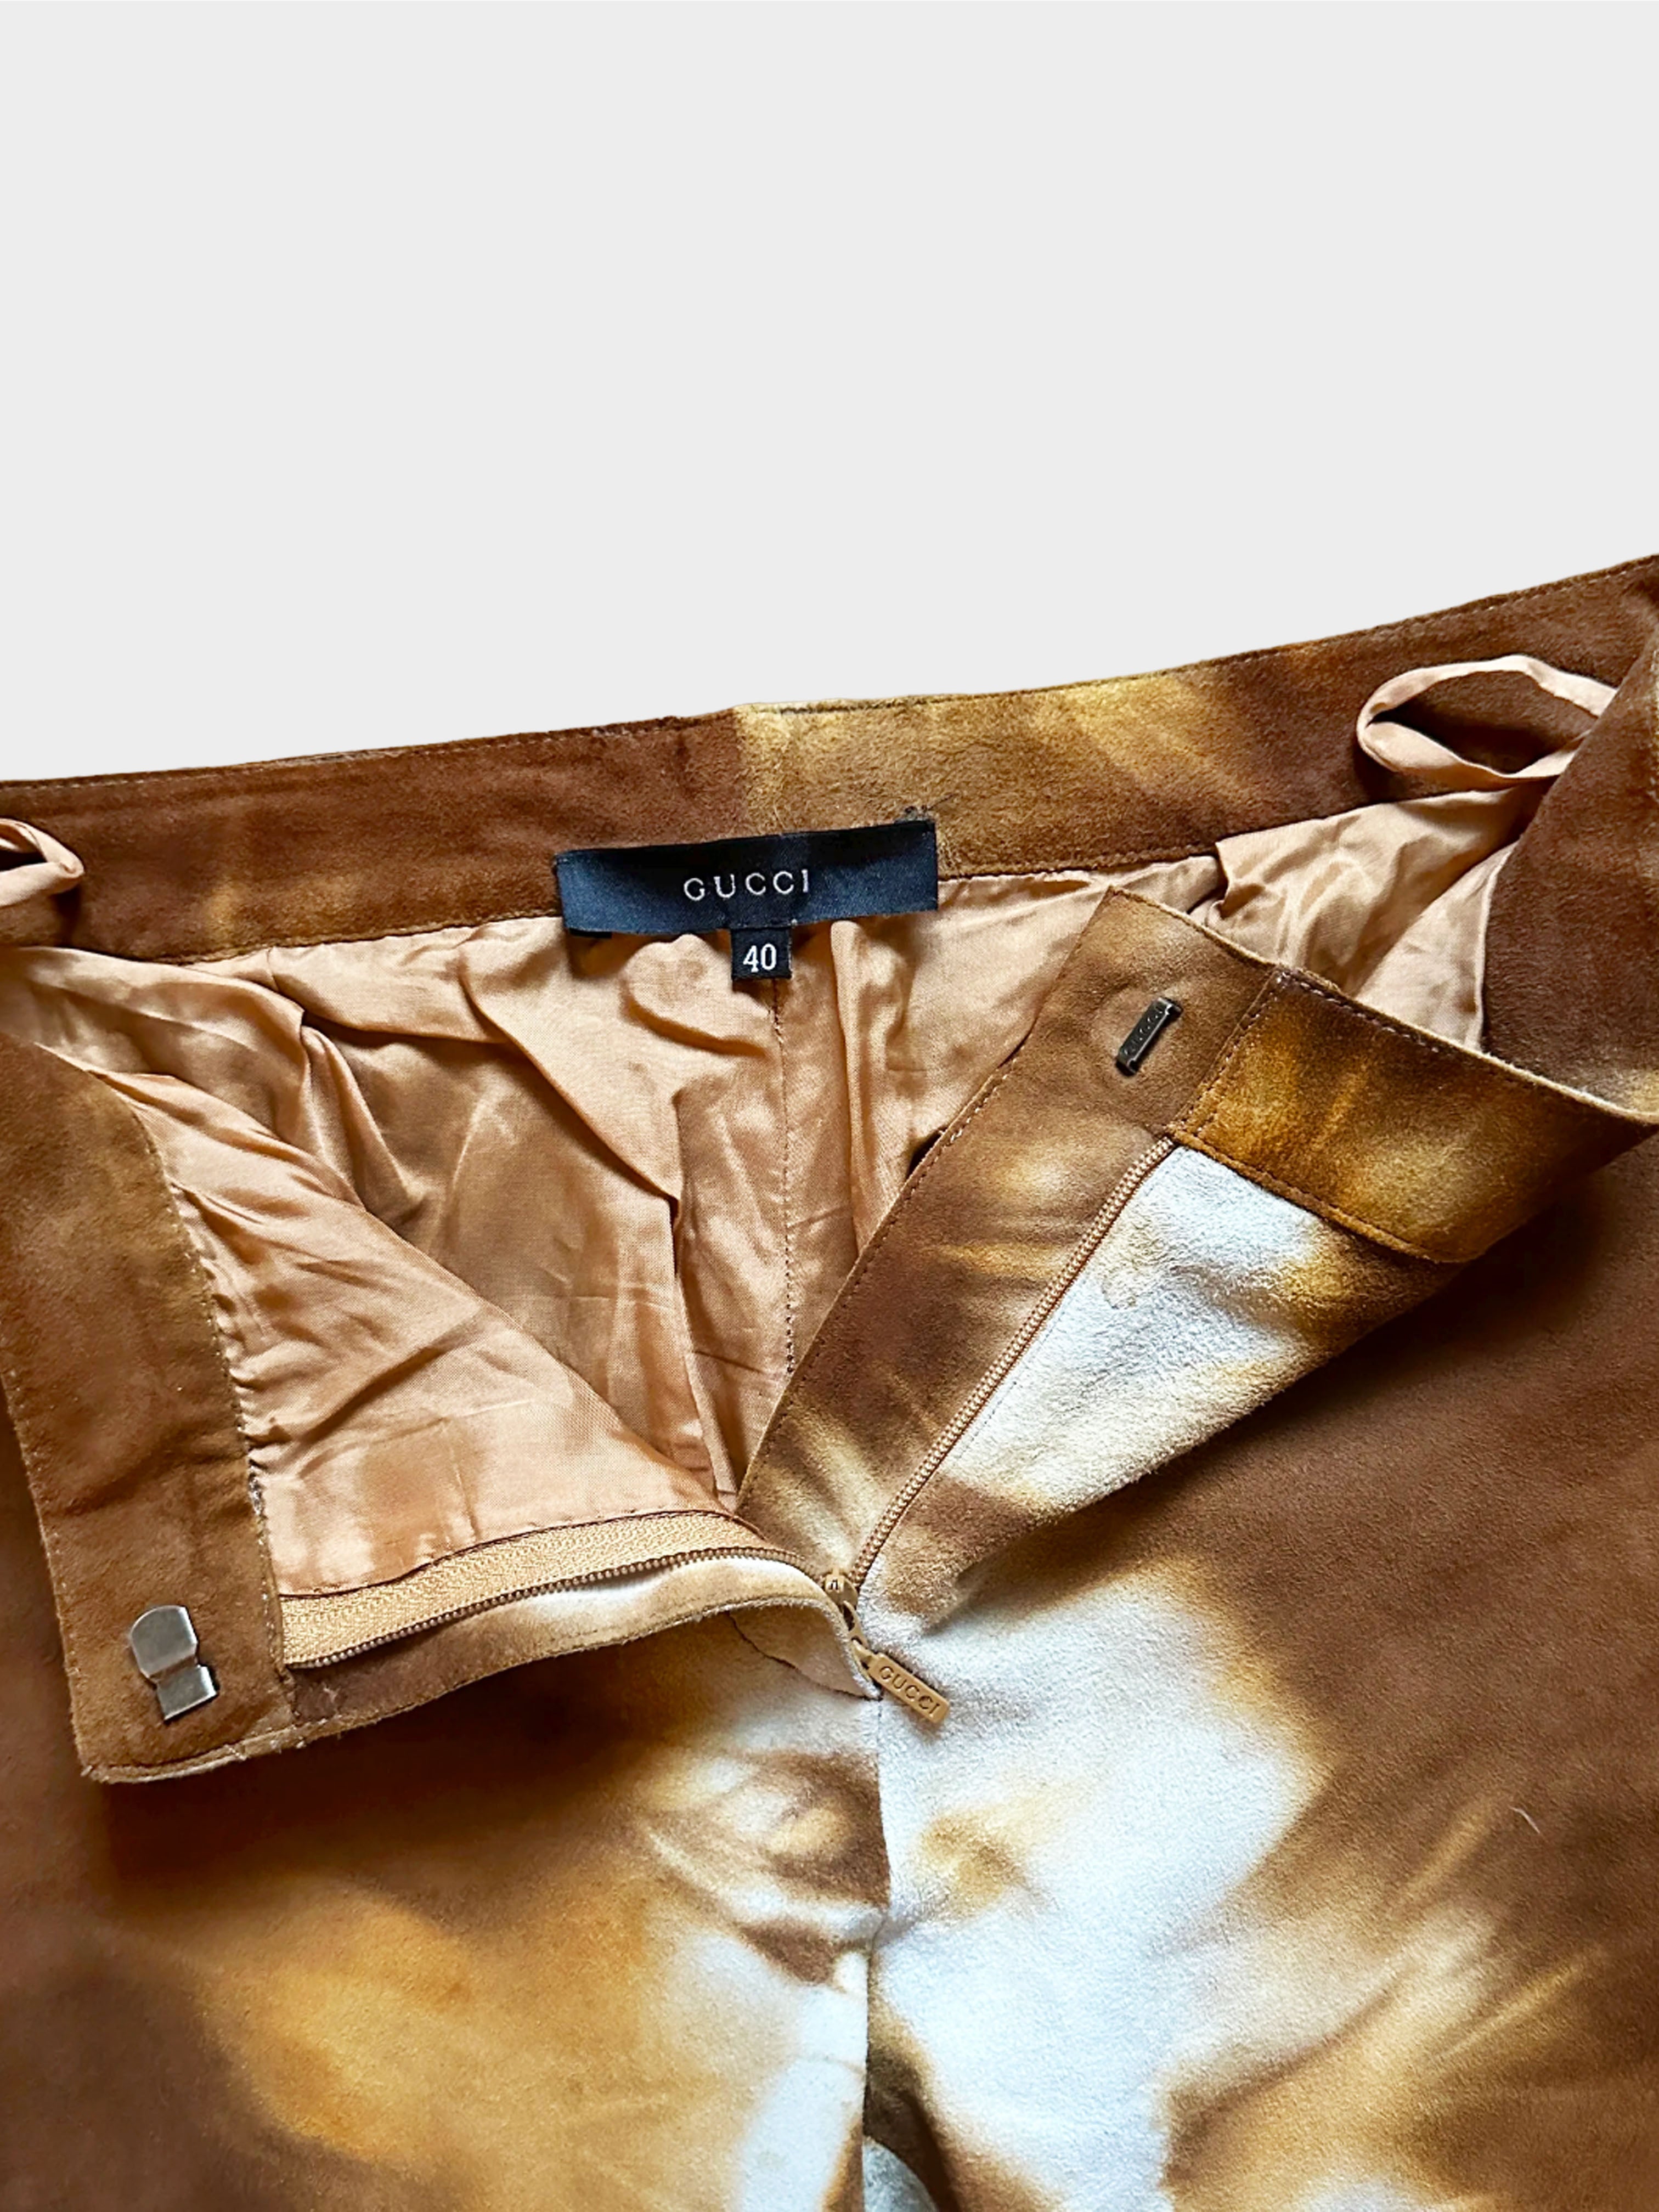 Gucci by Tom Ford FW 1999 Brown Tie Dye Suede Flared Pants